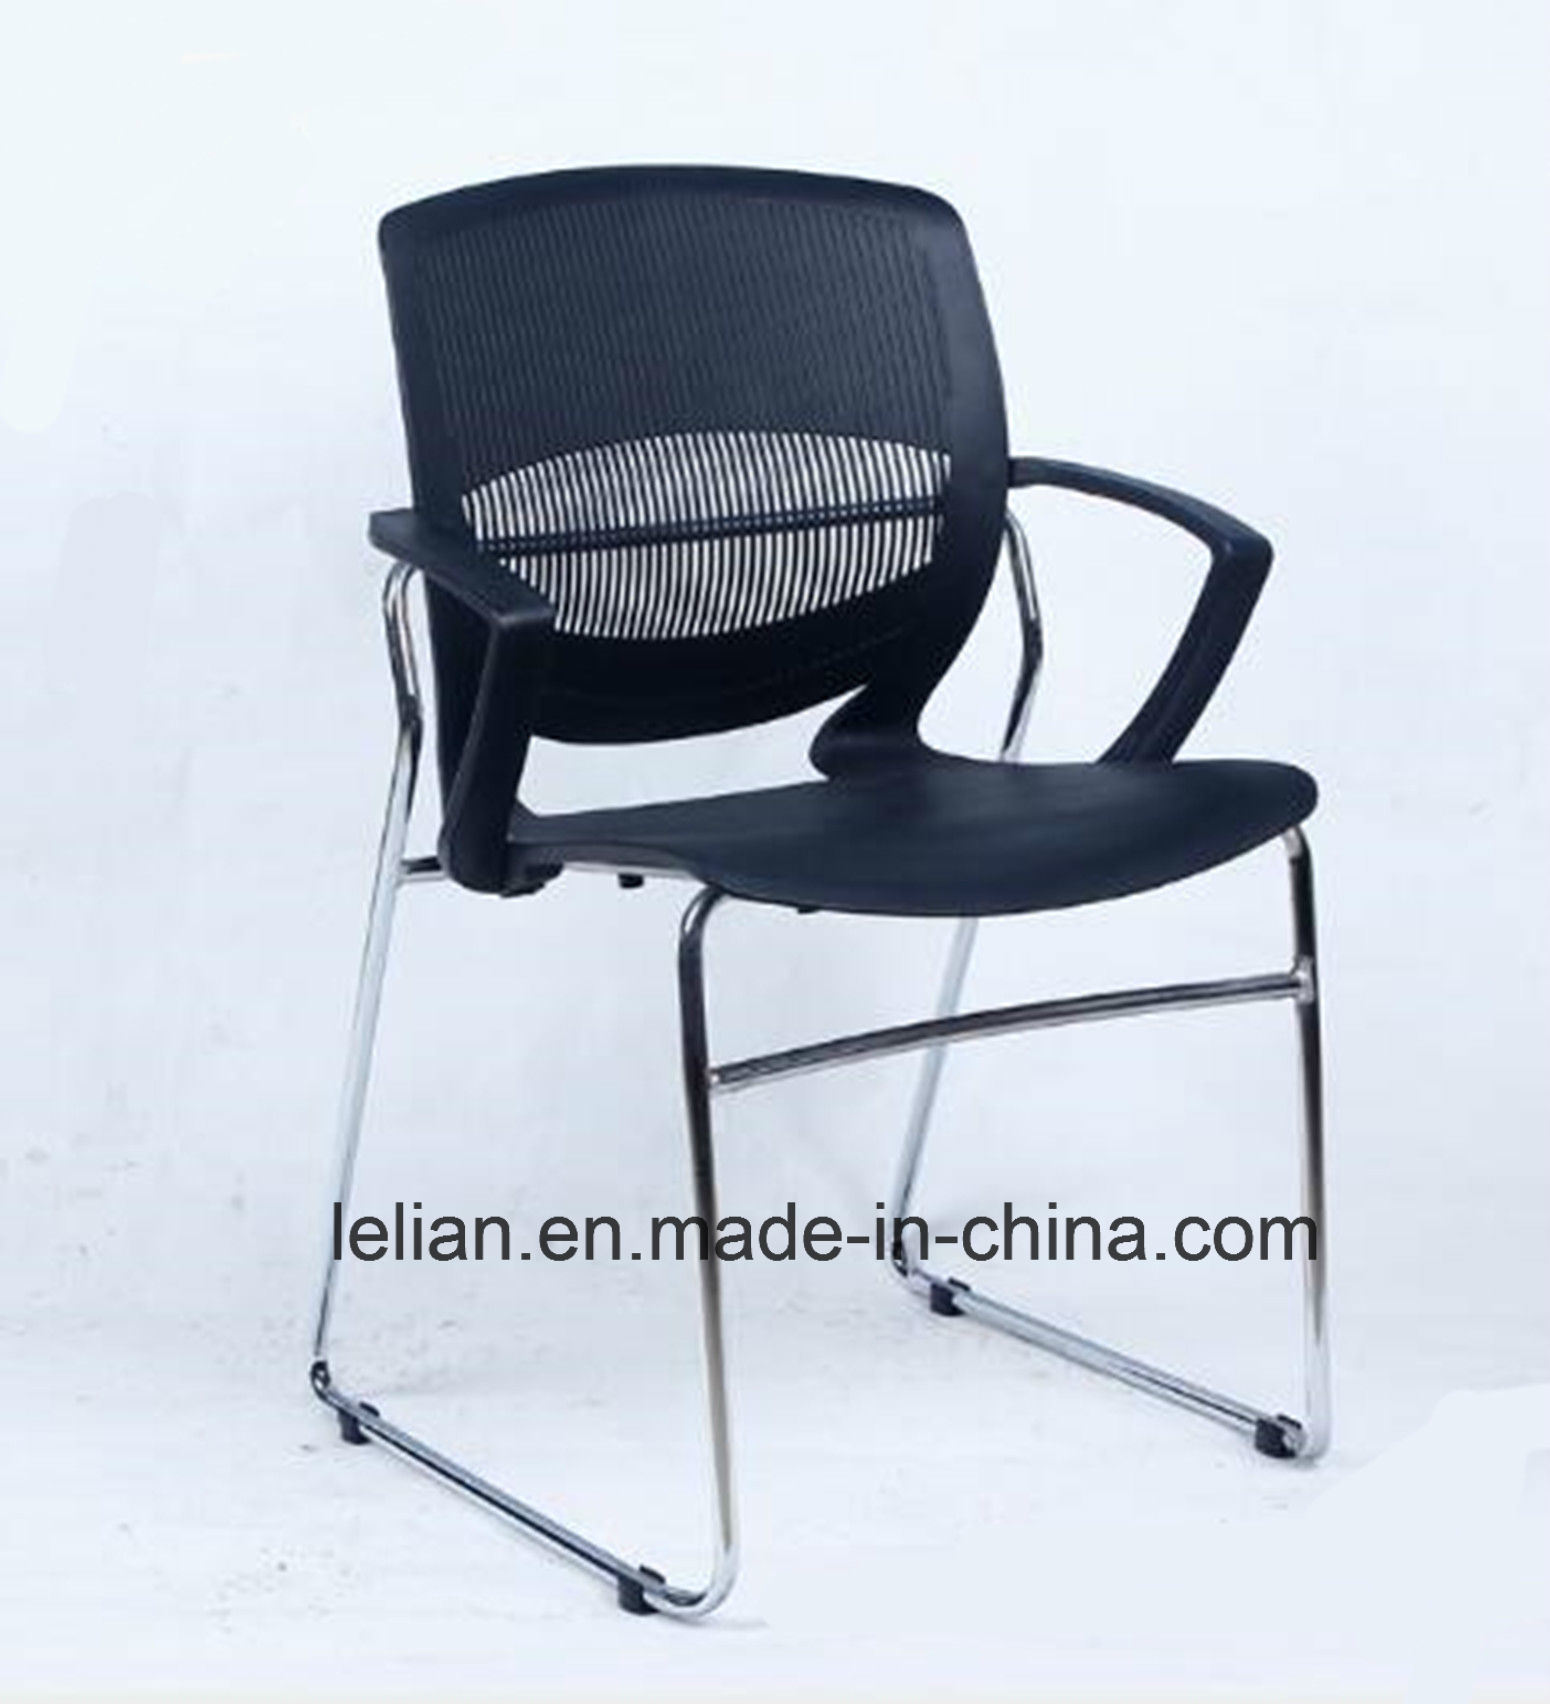 Quality Public Plastic Study Training Chair with Armrest